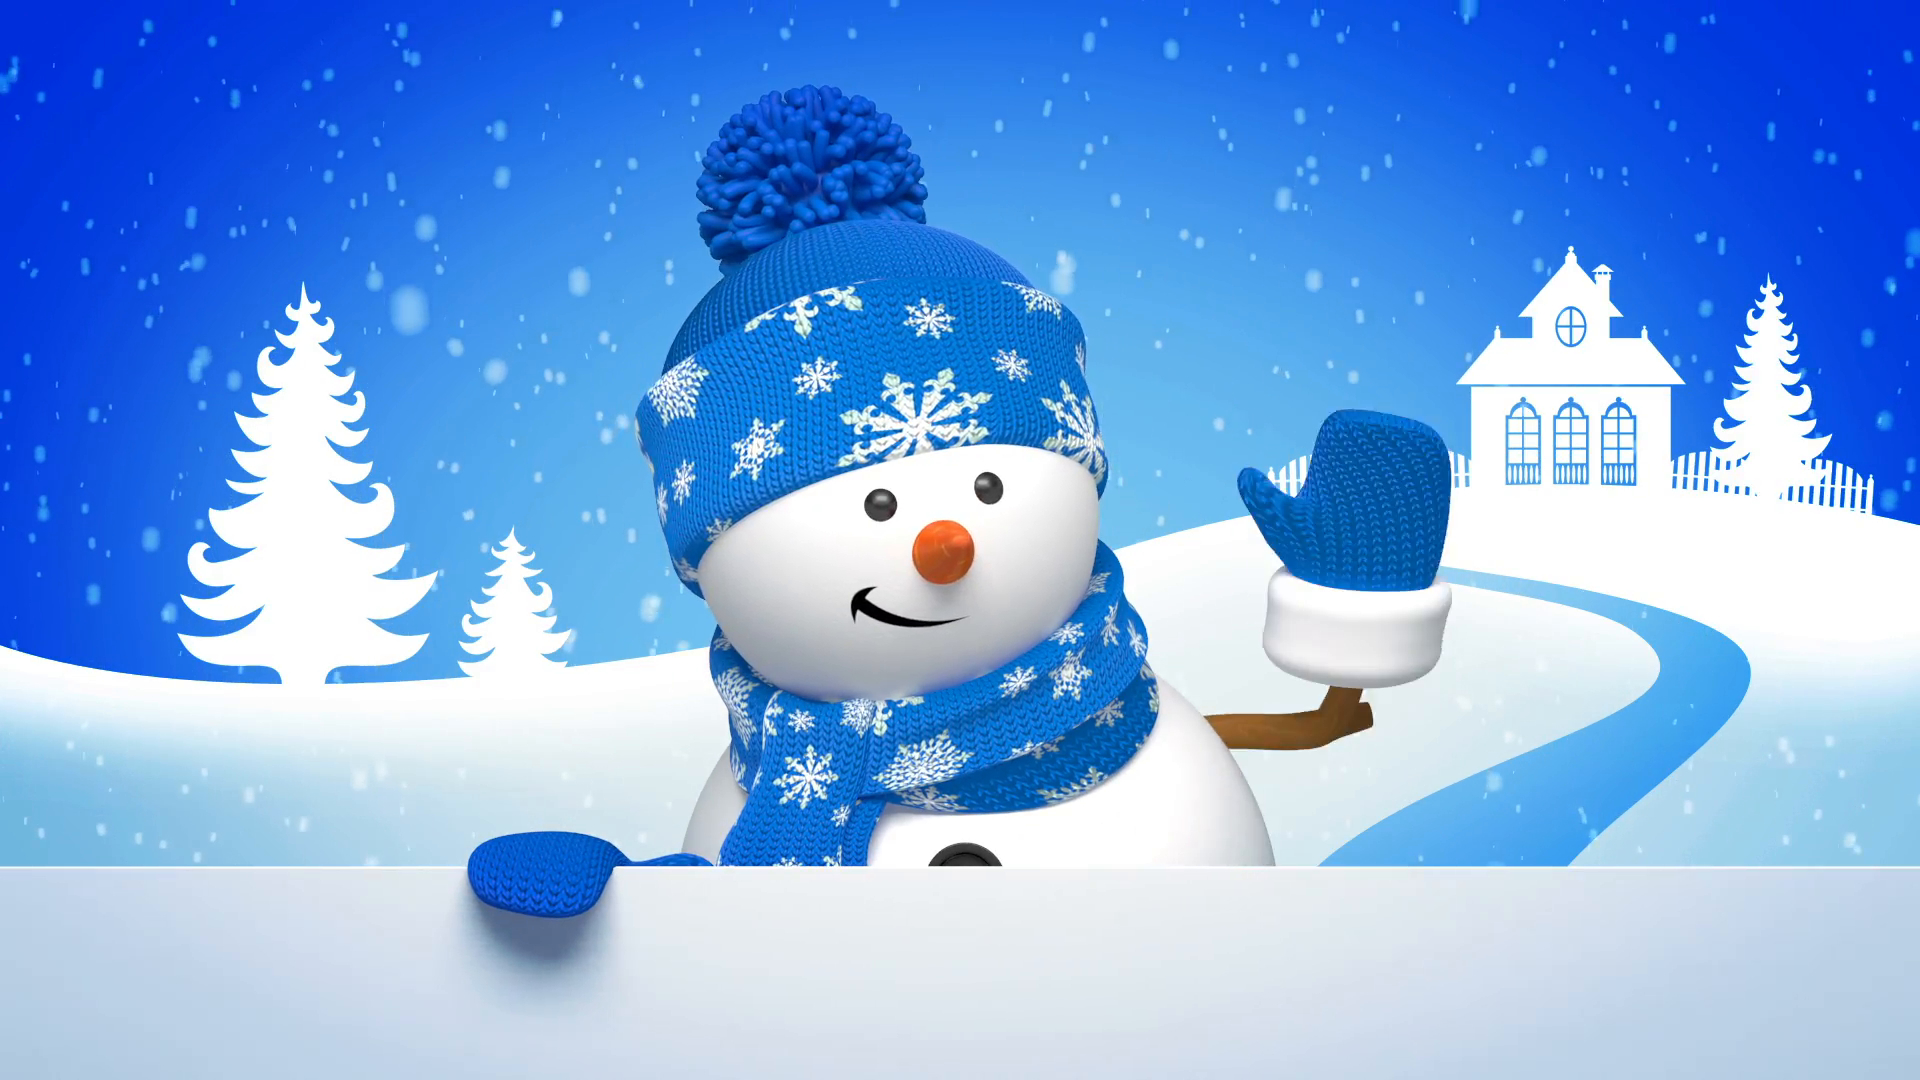 1920x1080 Merry Christmas Snowman Wallpapers Top Free Merry Christmas Snowman Backgrounds